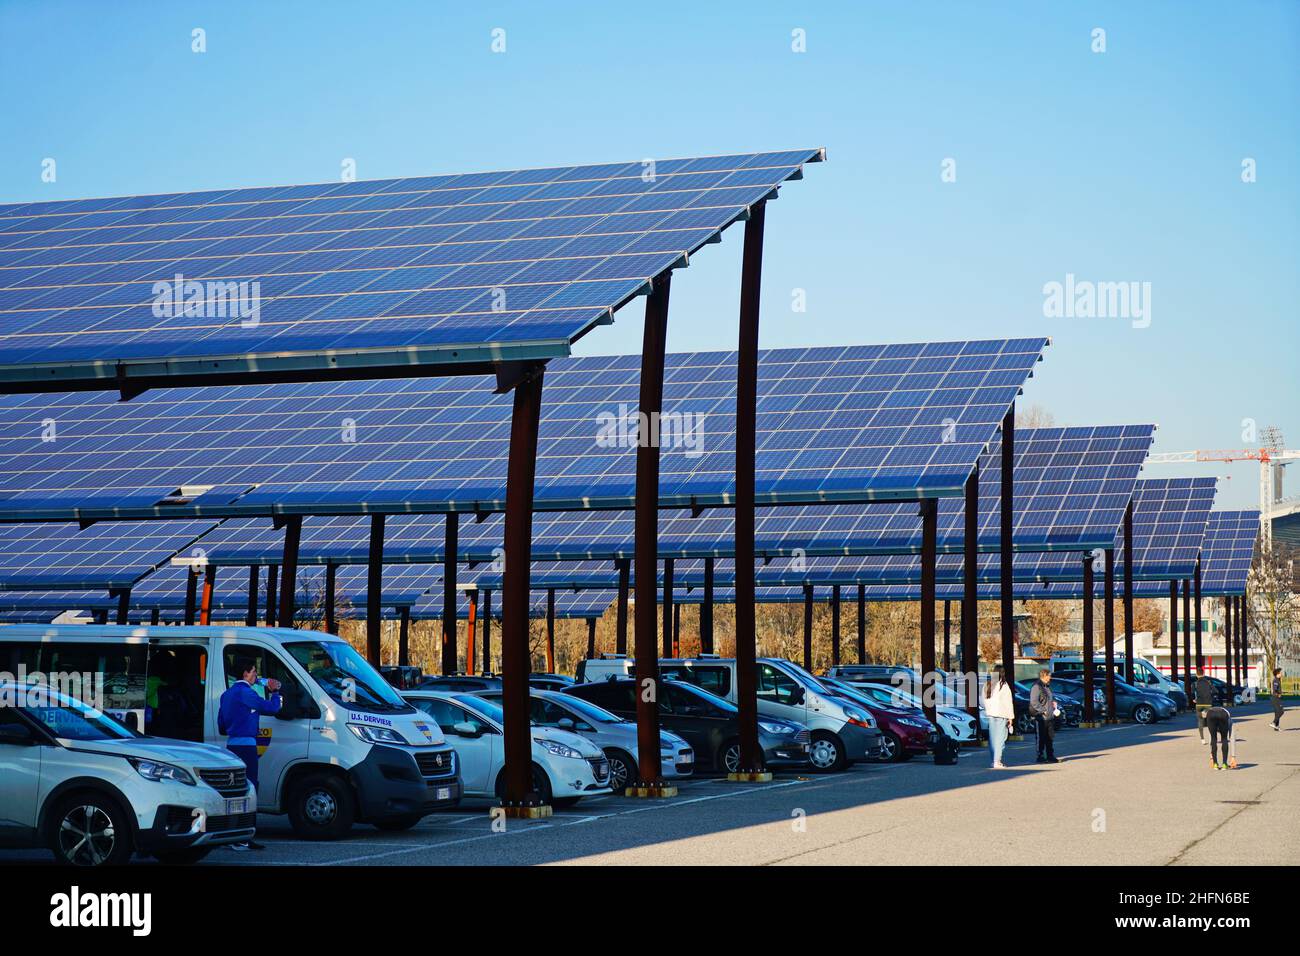 Solar panels in a car park. Companies are installing renewable energy sources to reduce their carbon footprint.  Padua, Italy - January 2022 Stock Photo